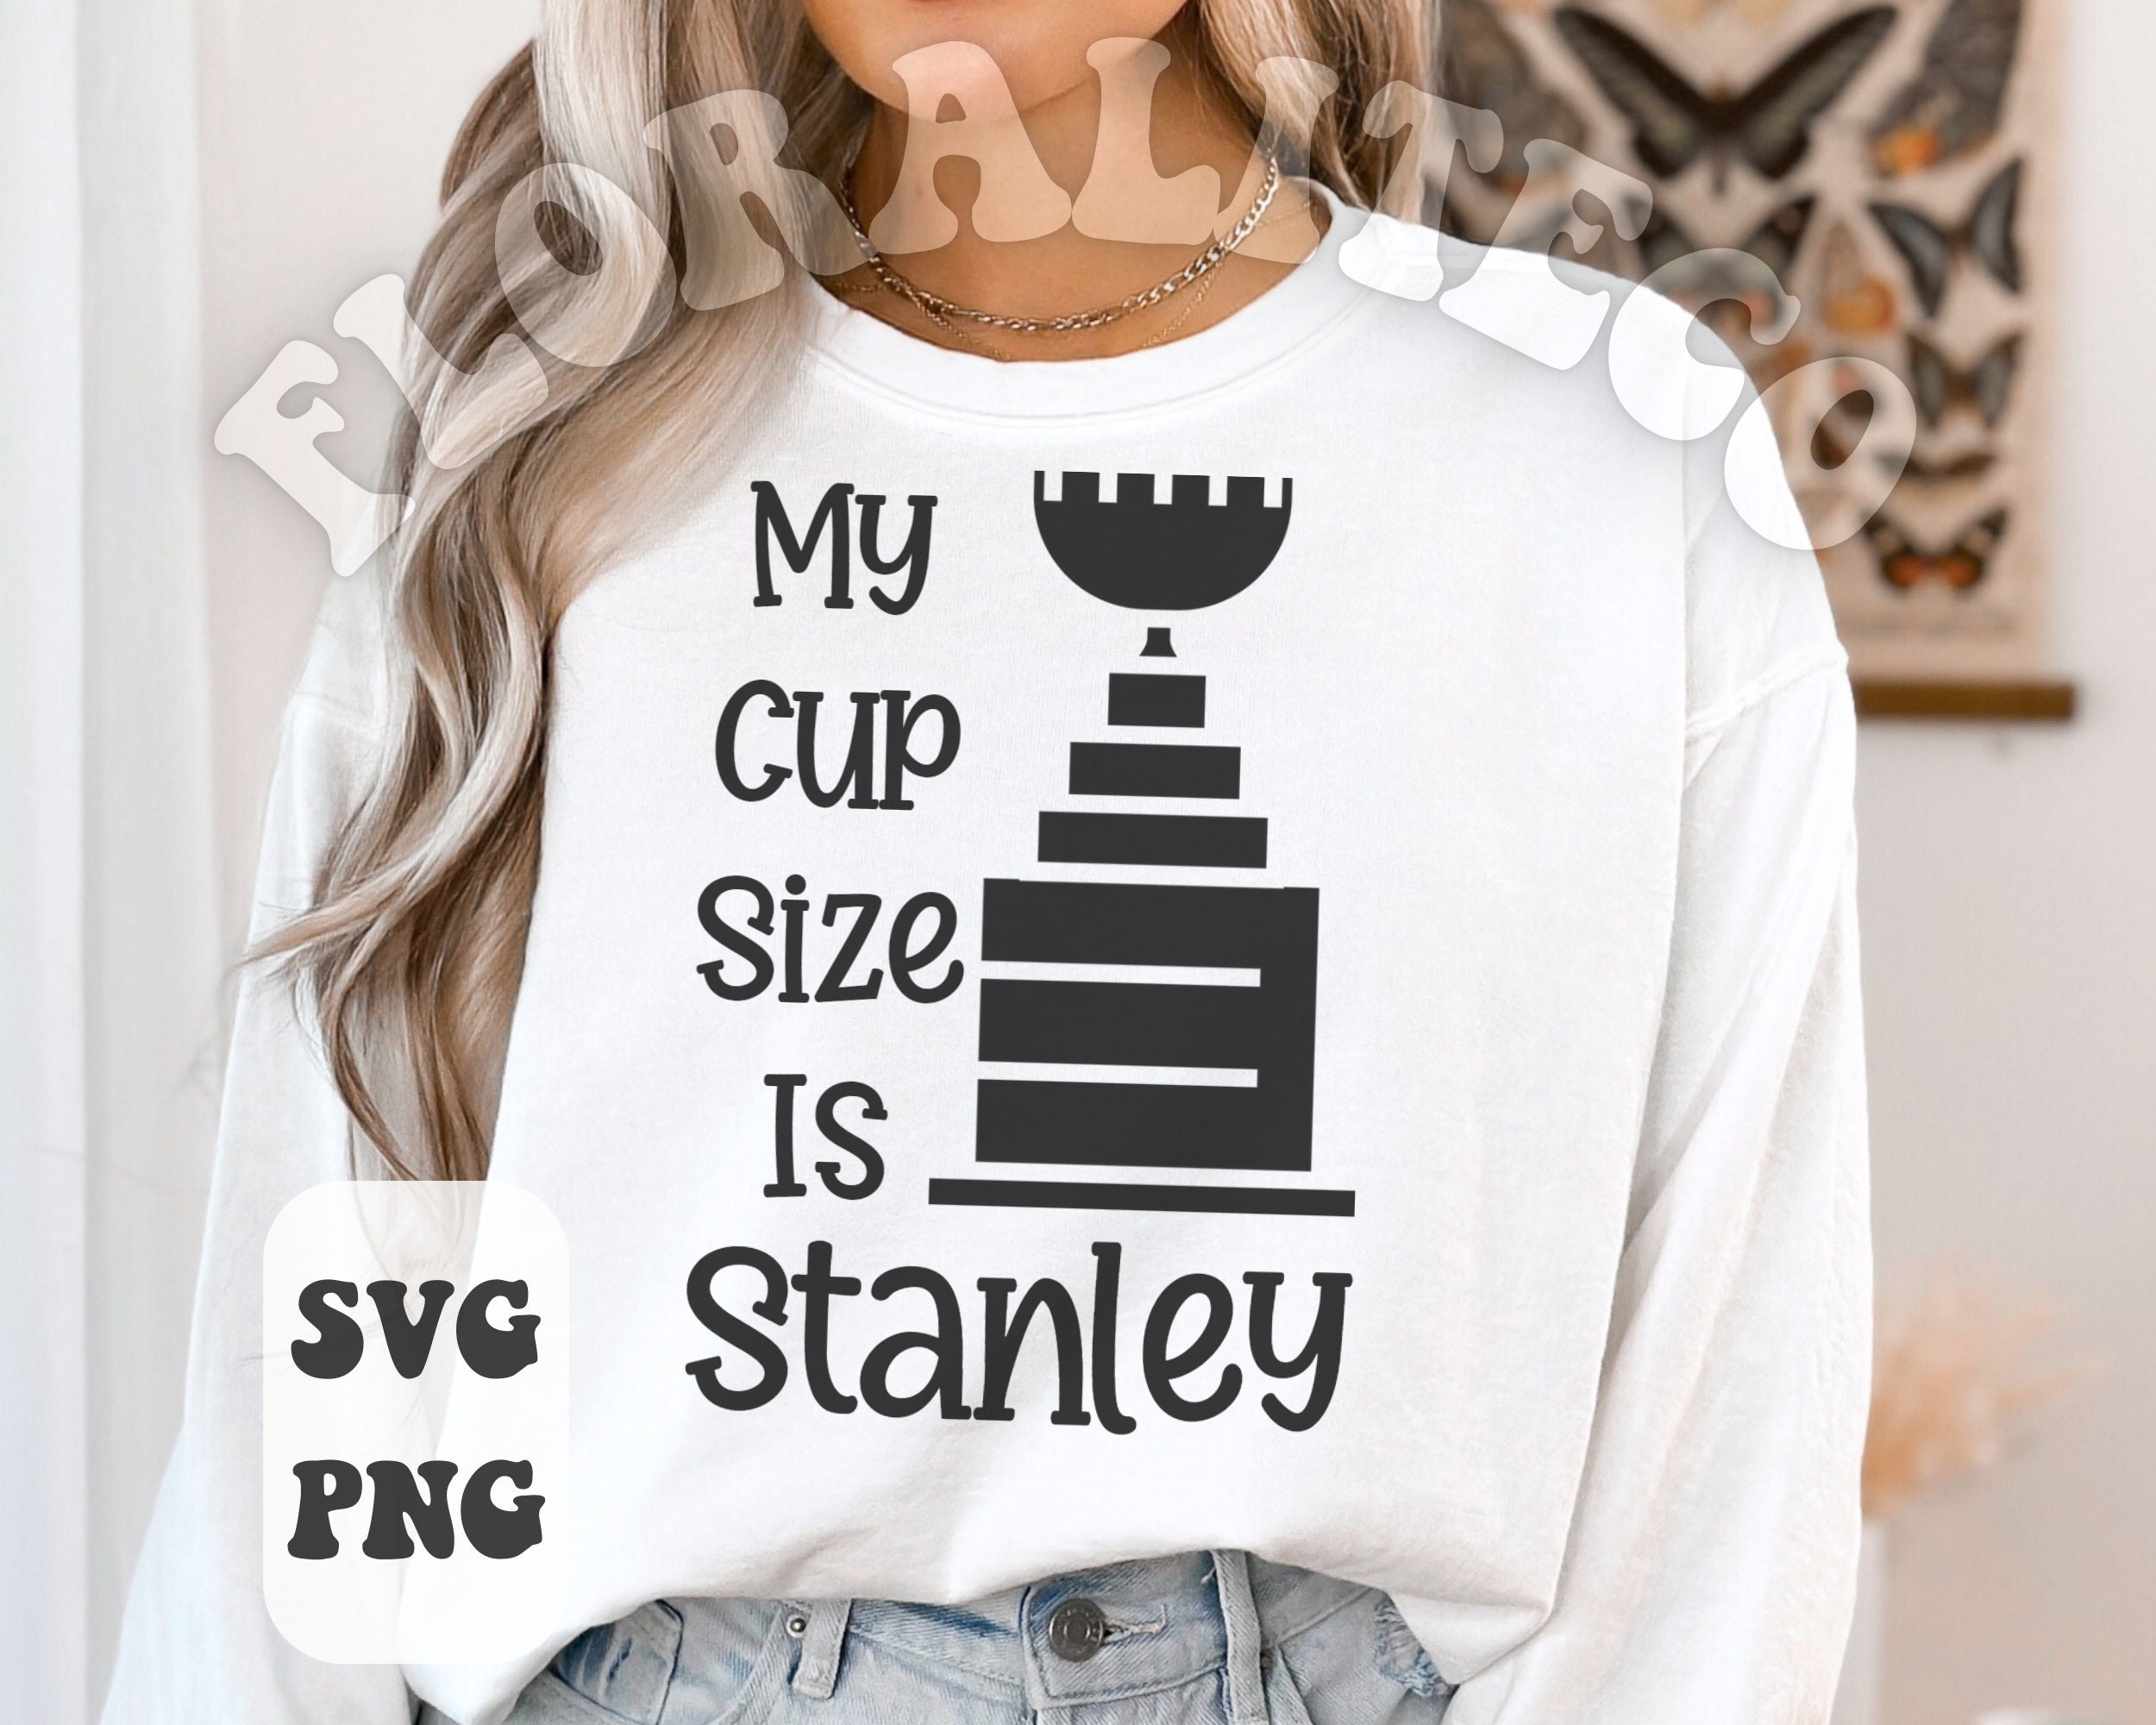 My Cup Size is Stanley - Tampa Bay Lightning Hoodie – The Junkyard